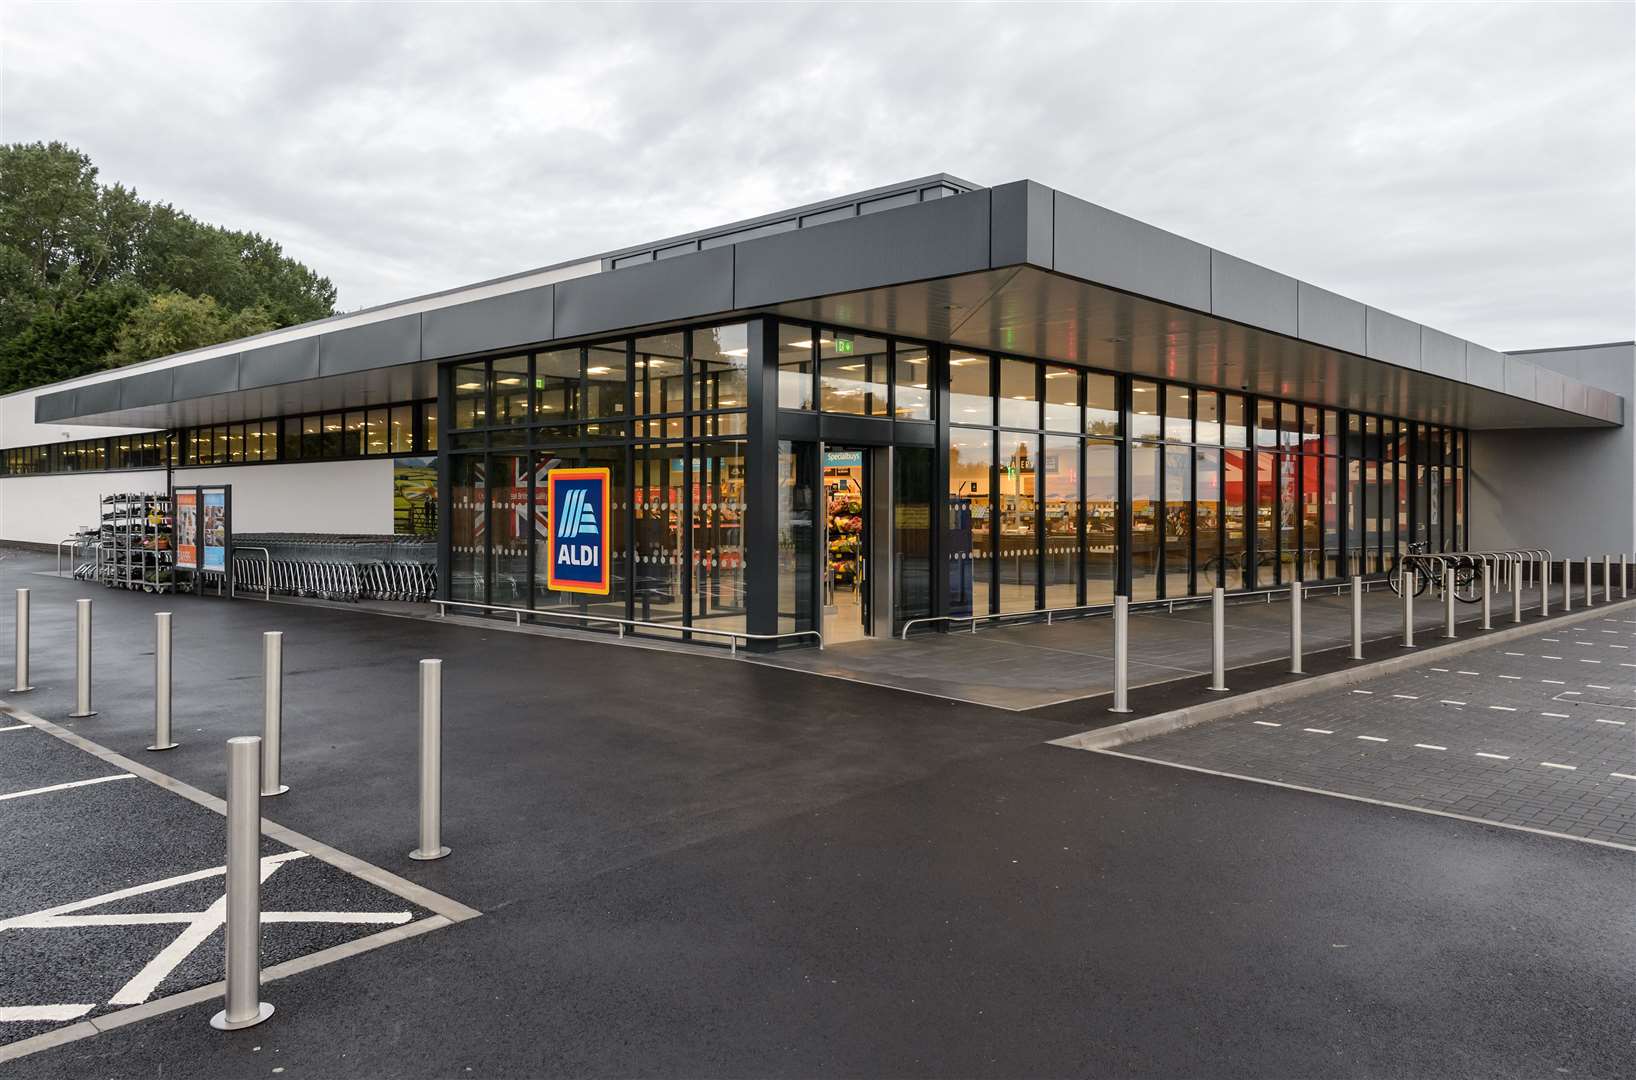 An example of an Aldi store